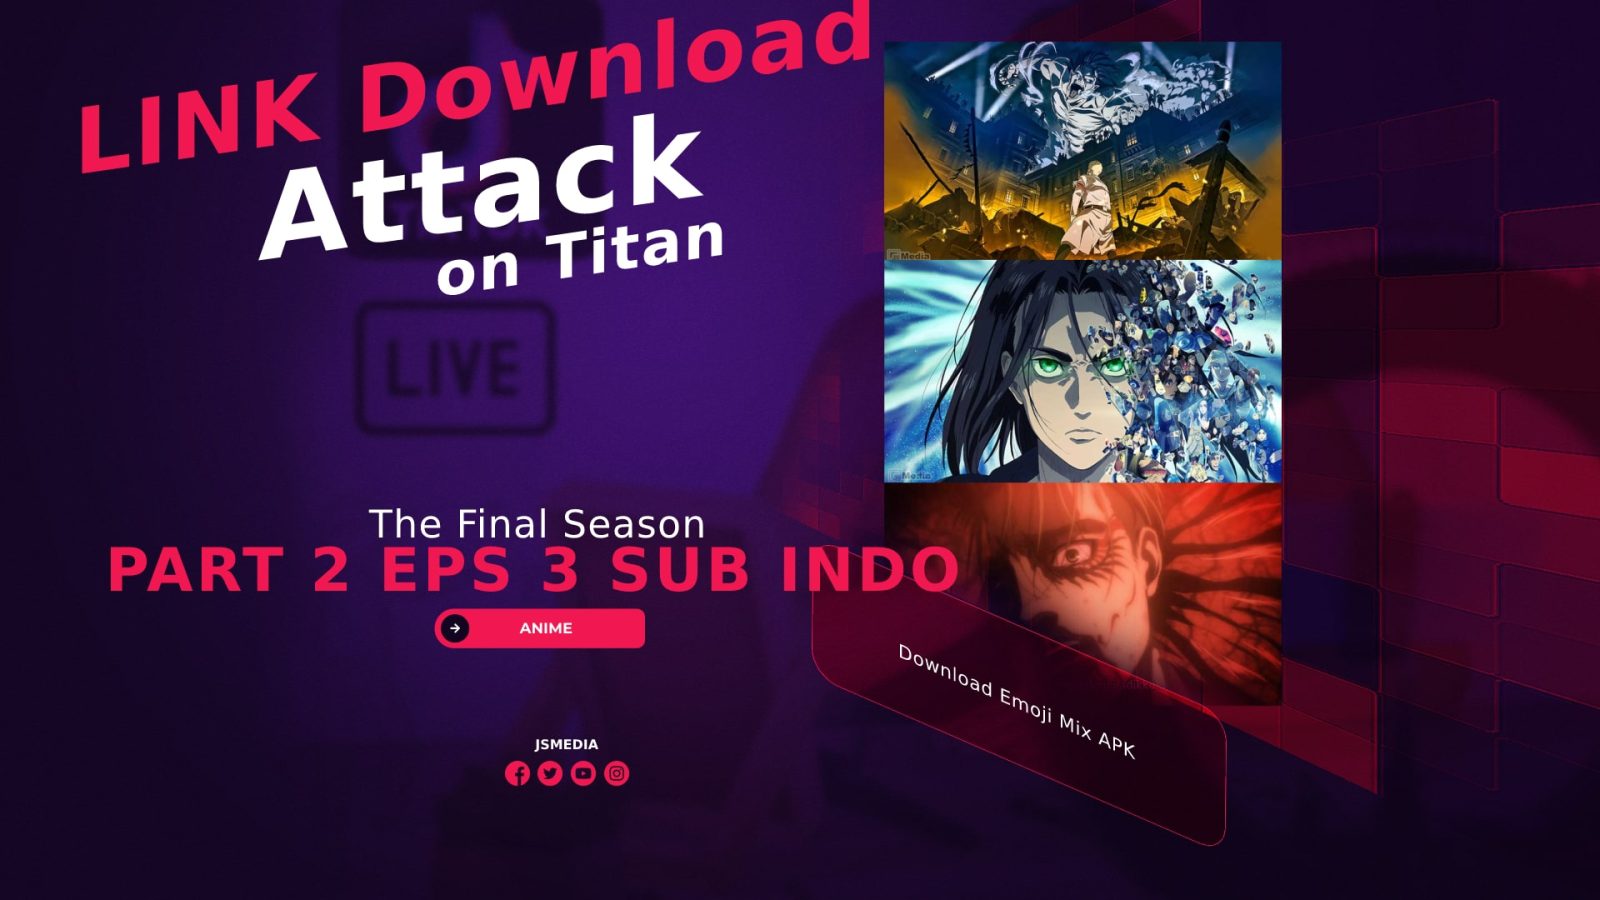 LINK Download Attack on Titan The Final Season Part 2 Eps 3 Sub Indo